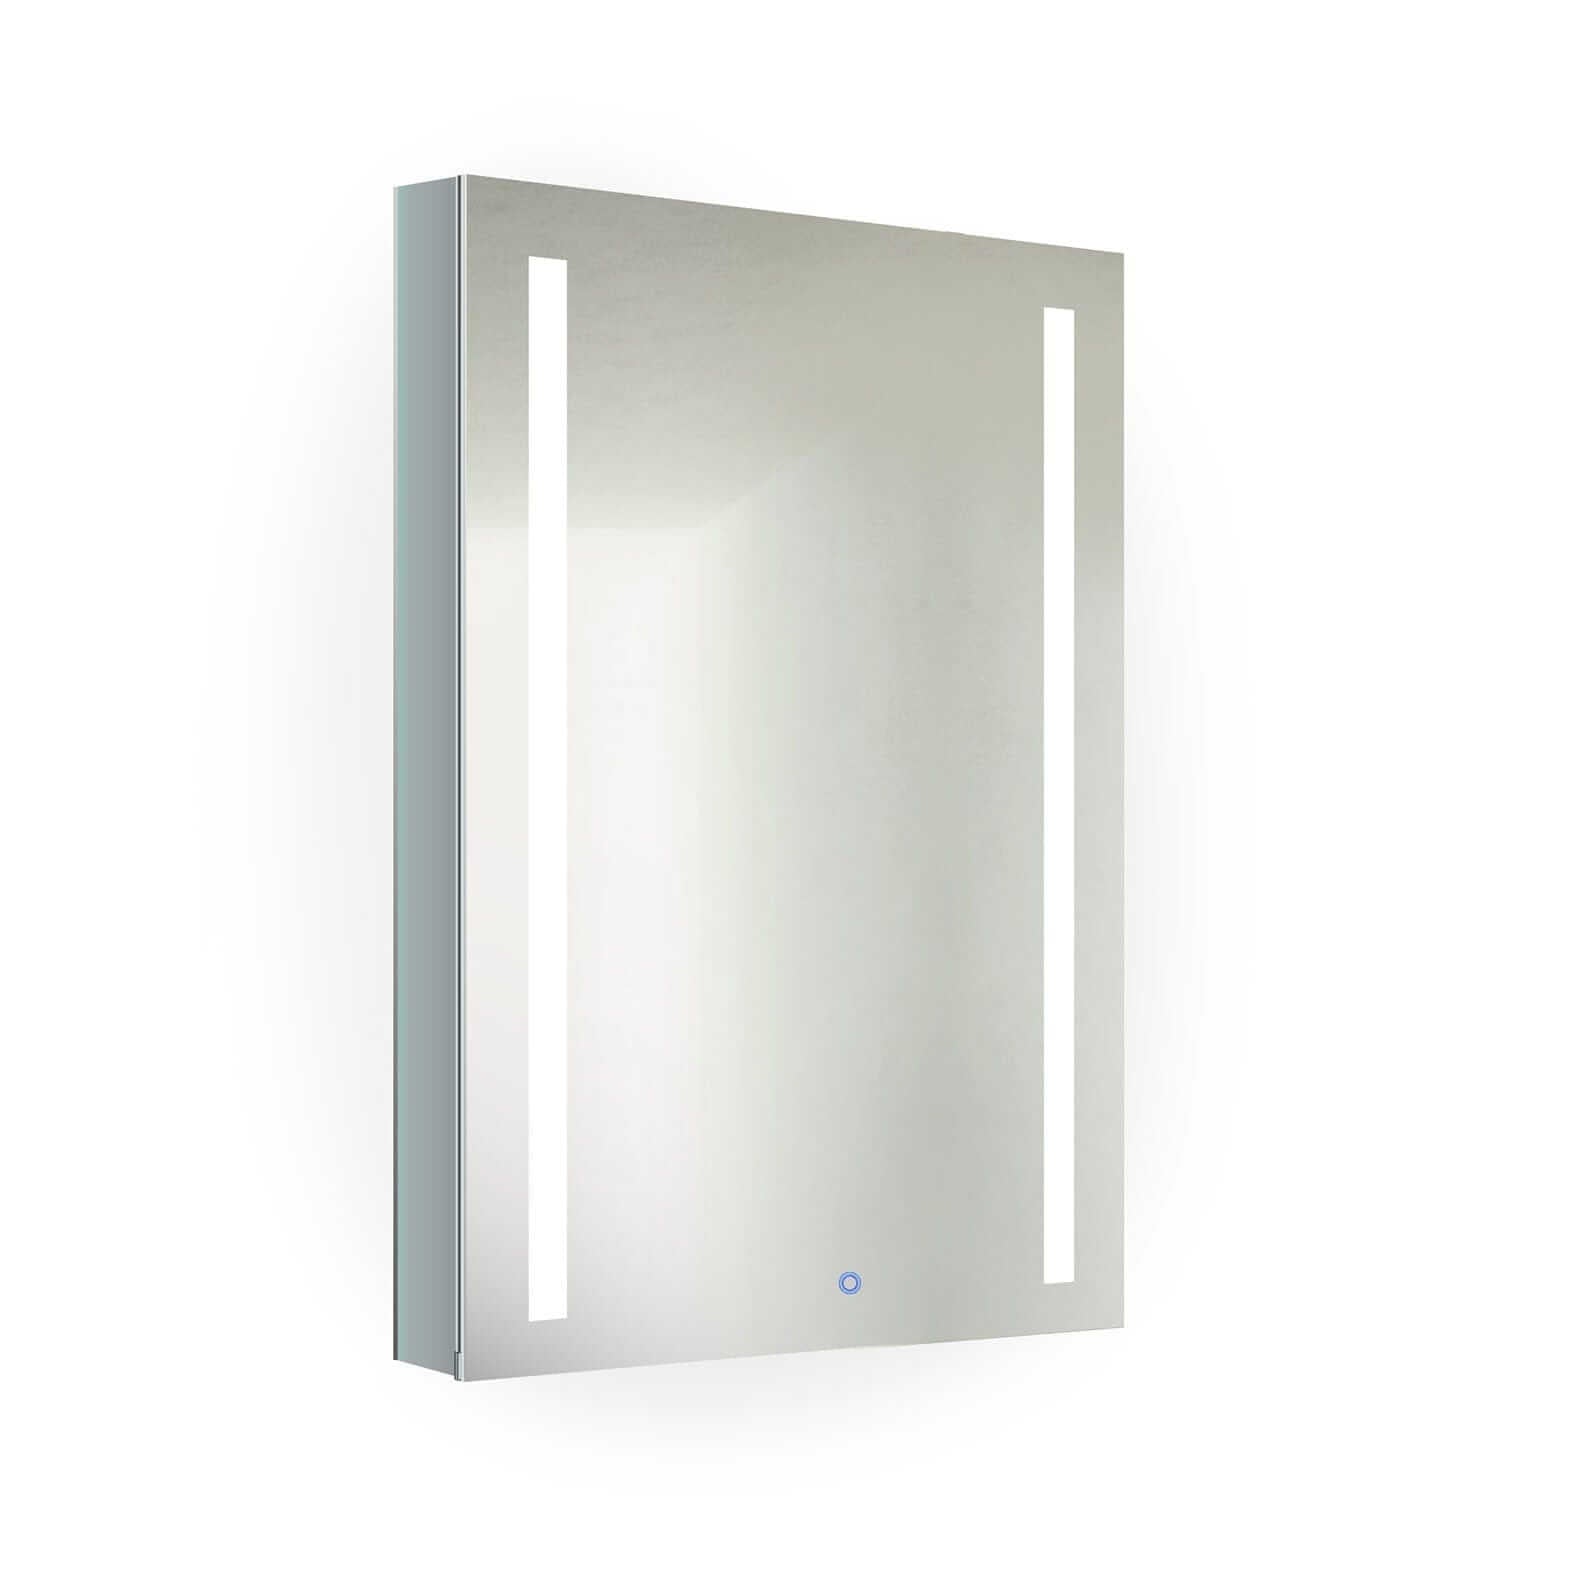 Krugg Kinetic 20W x 30H Lighted Medicine Cabinet w/ Defogger Lighted Medicine Cabinet, LED Medicine Cabinet, Lighted Medicine Cabinet With Mirror Krugg Reflections USA Right-Opening 